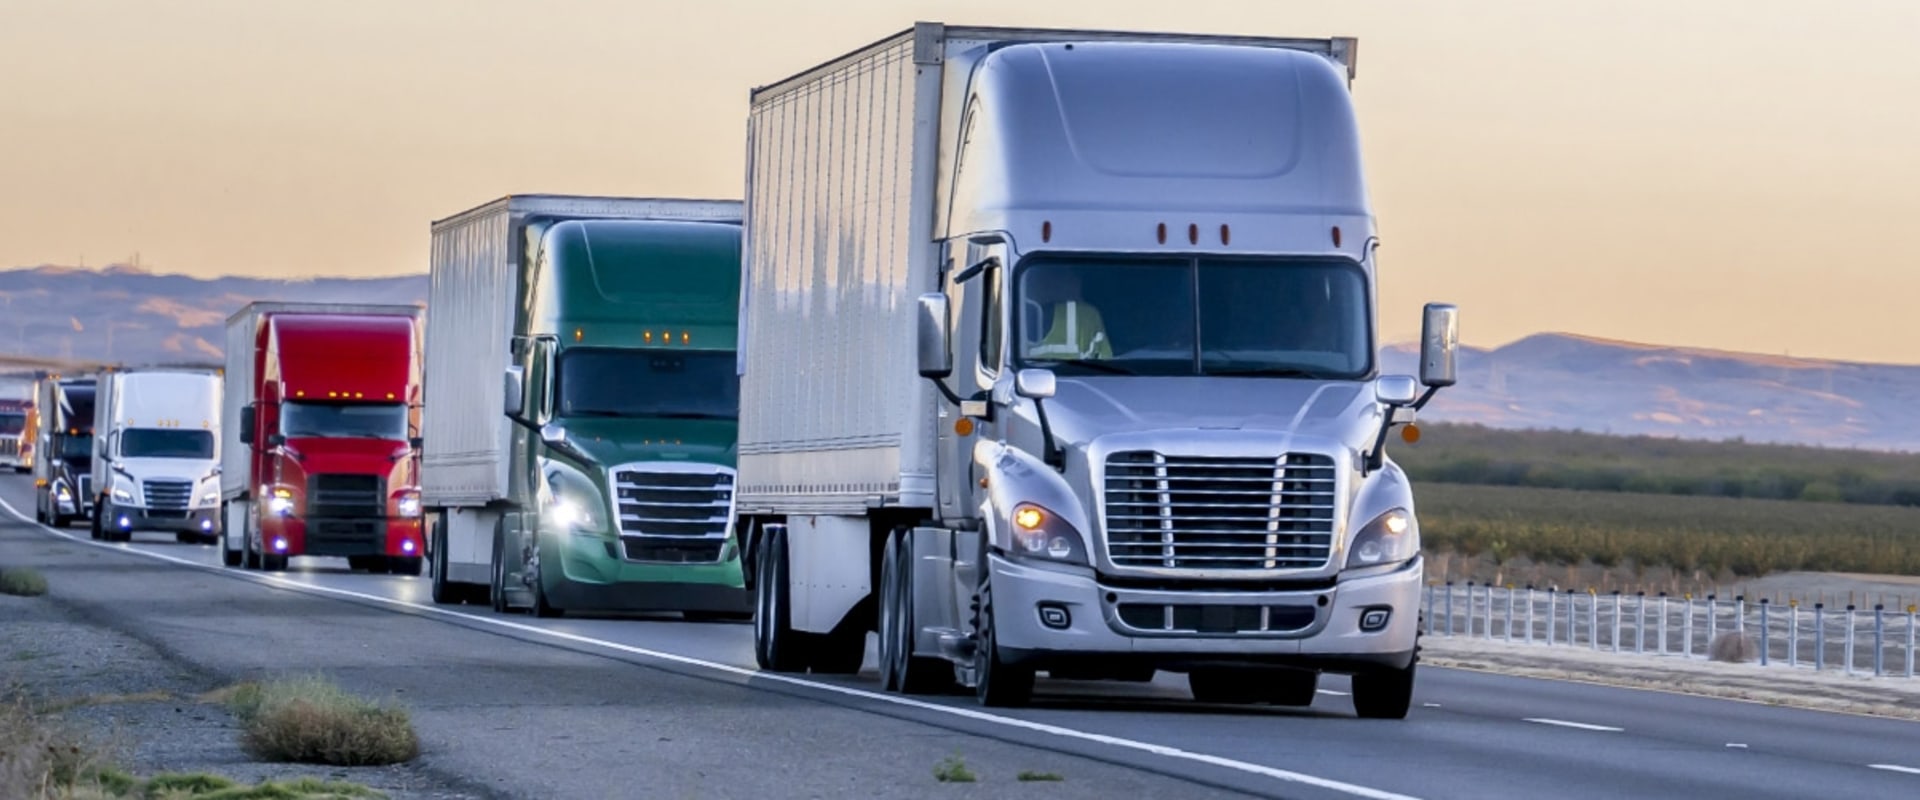 Optimizing Trucking Operations: The Benefits of In-Cab Devices